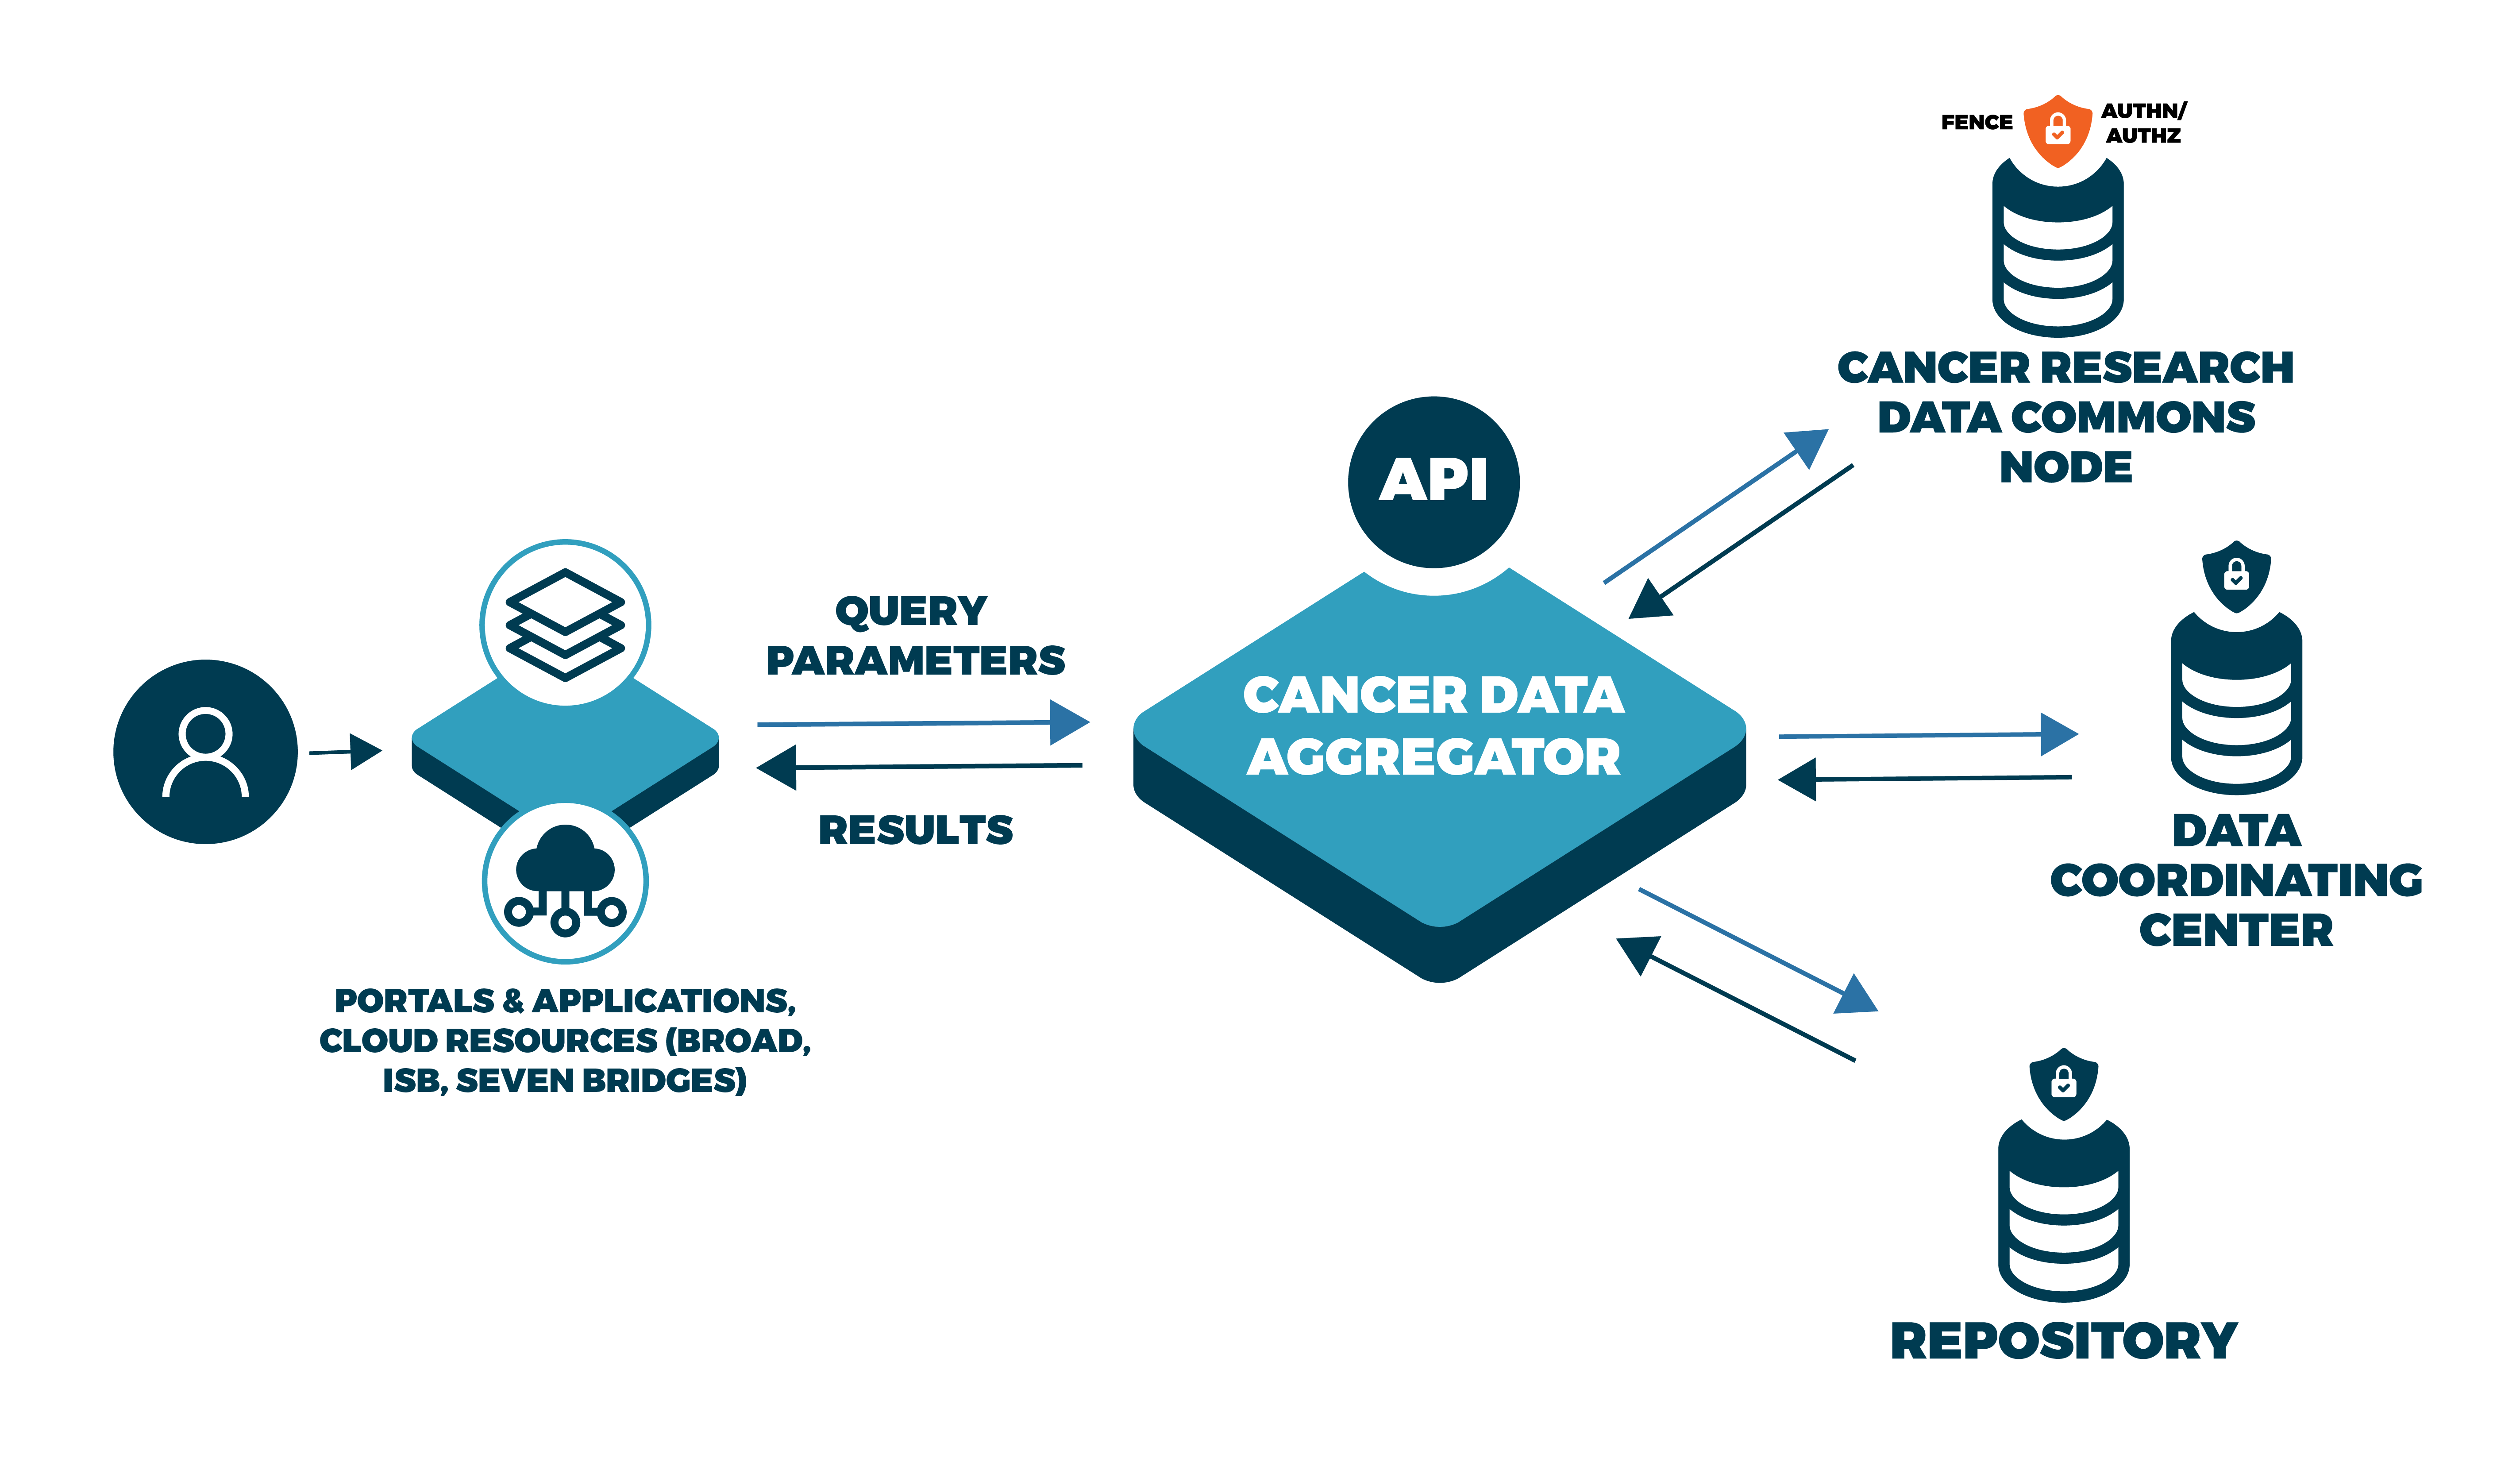 The functionality of the cancer data aggregator can be described as this: a user is currently on a data portal or application. That application will connect to the Cancer Data Aggregator through an API that allows users to query parameters for data sets. The aggregator then queries across the Cancer Research Data Commons, NCI Data Coordinating Centers, and other NIH repositories, aggregating data that matches that query. The data will return to the aggregator to be transformed through a common data model. 